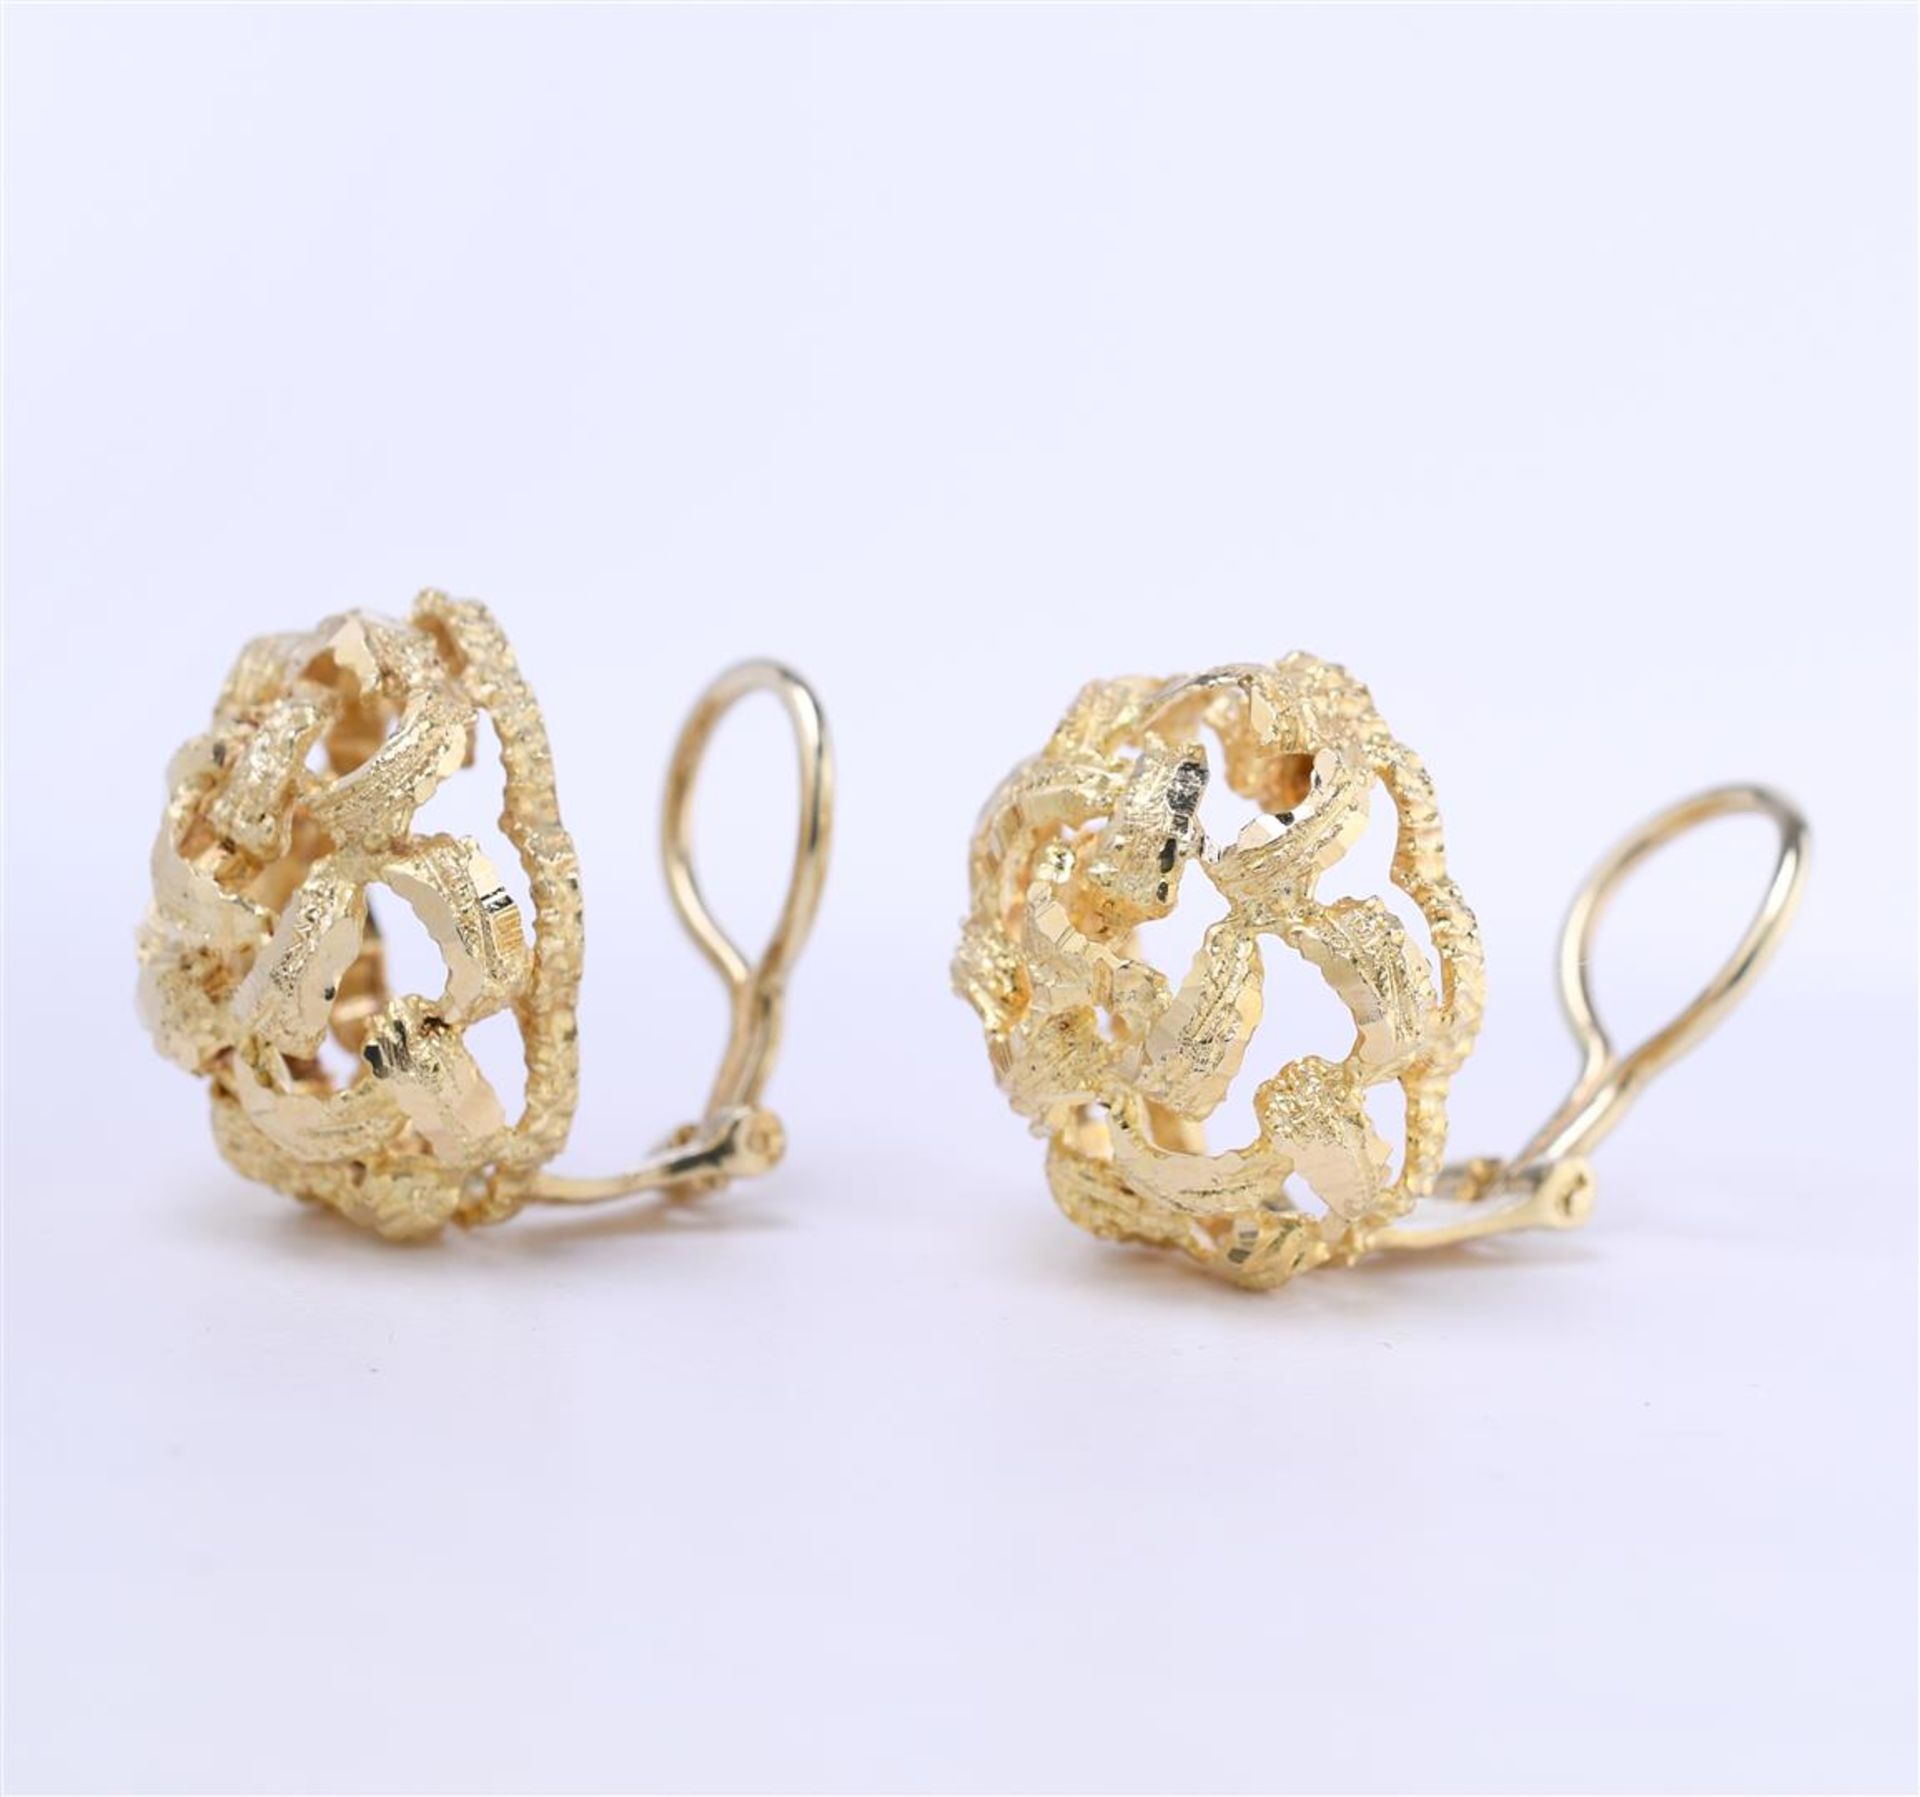 14 kt yellow gold ear clips (without plug.) Weight 9.1 grams for both ear clips - Image 2 of 5